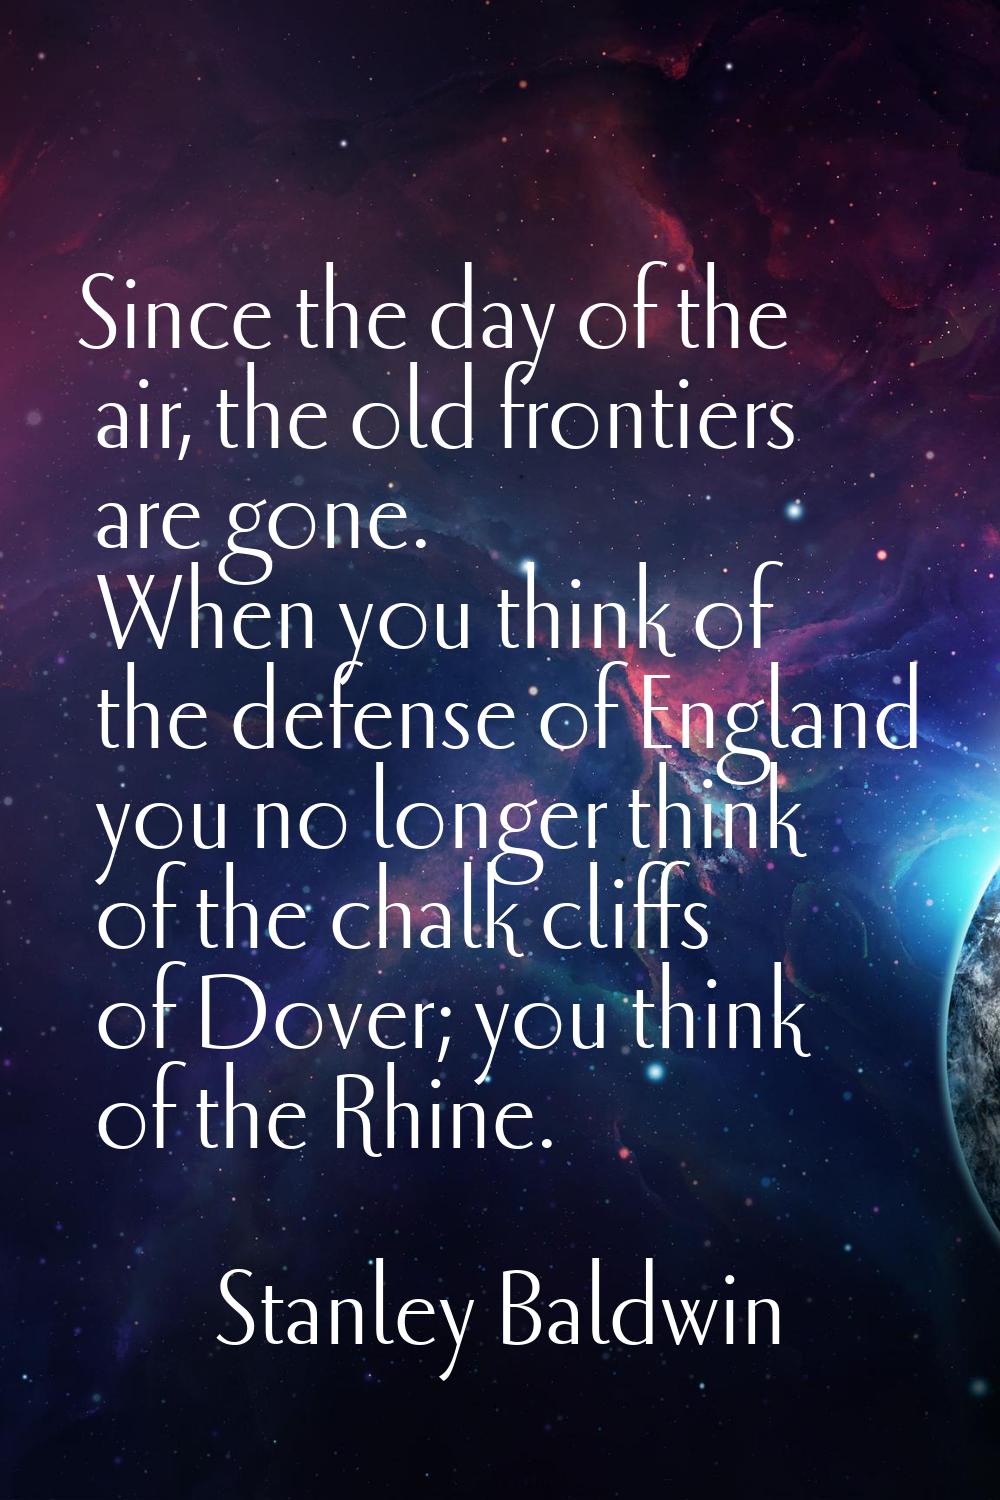 Since the day of the air, the old frontiers are gone. When you think of the defense of England you 